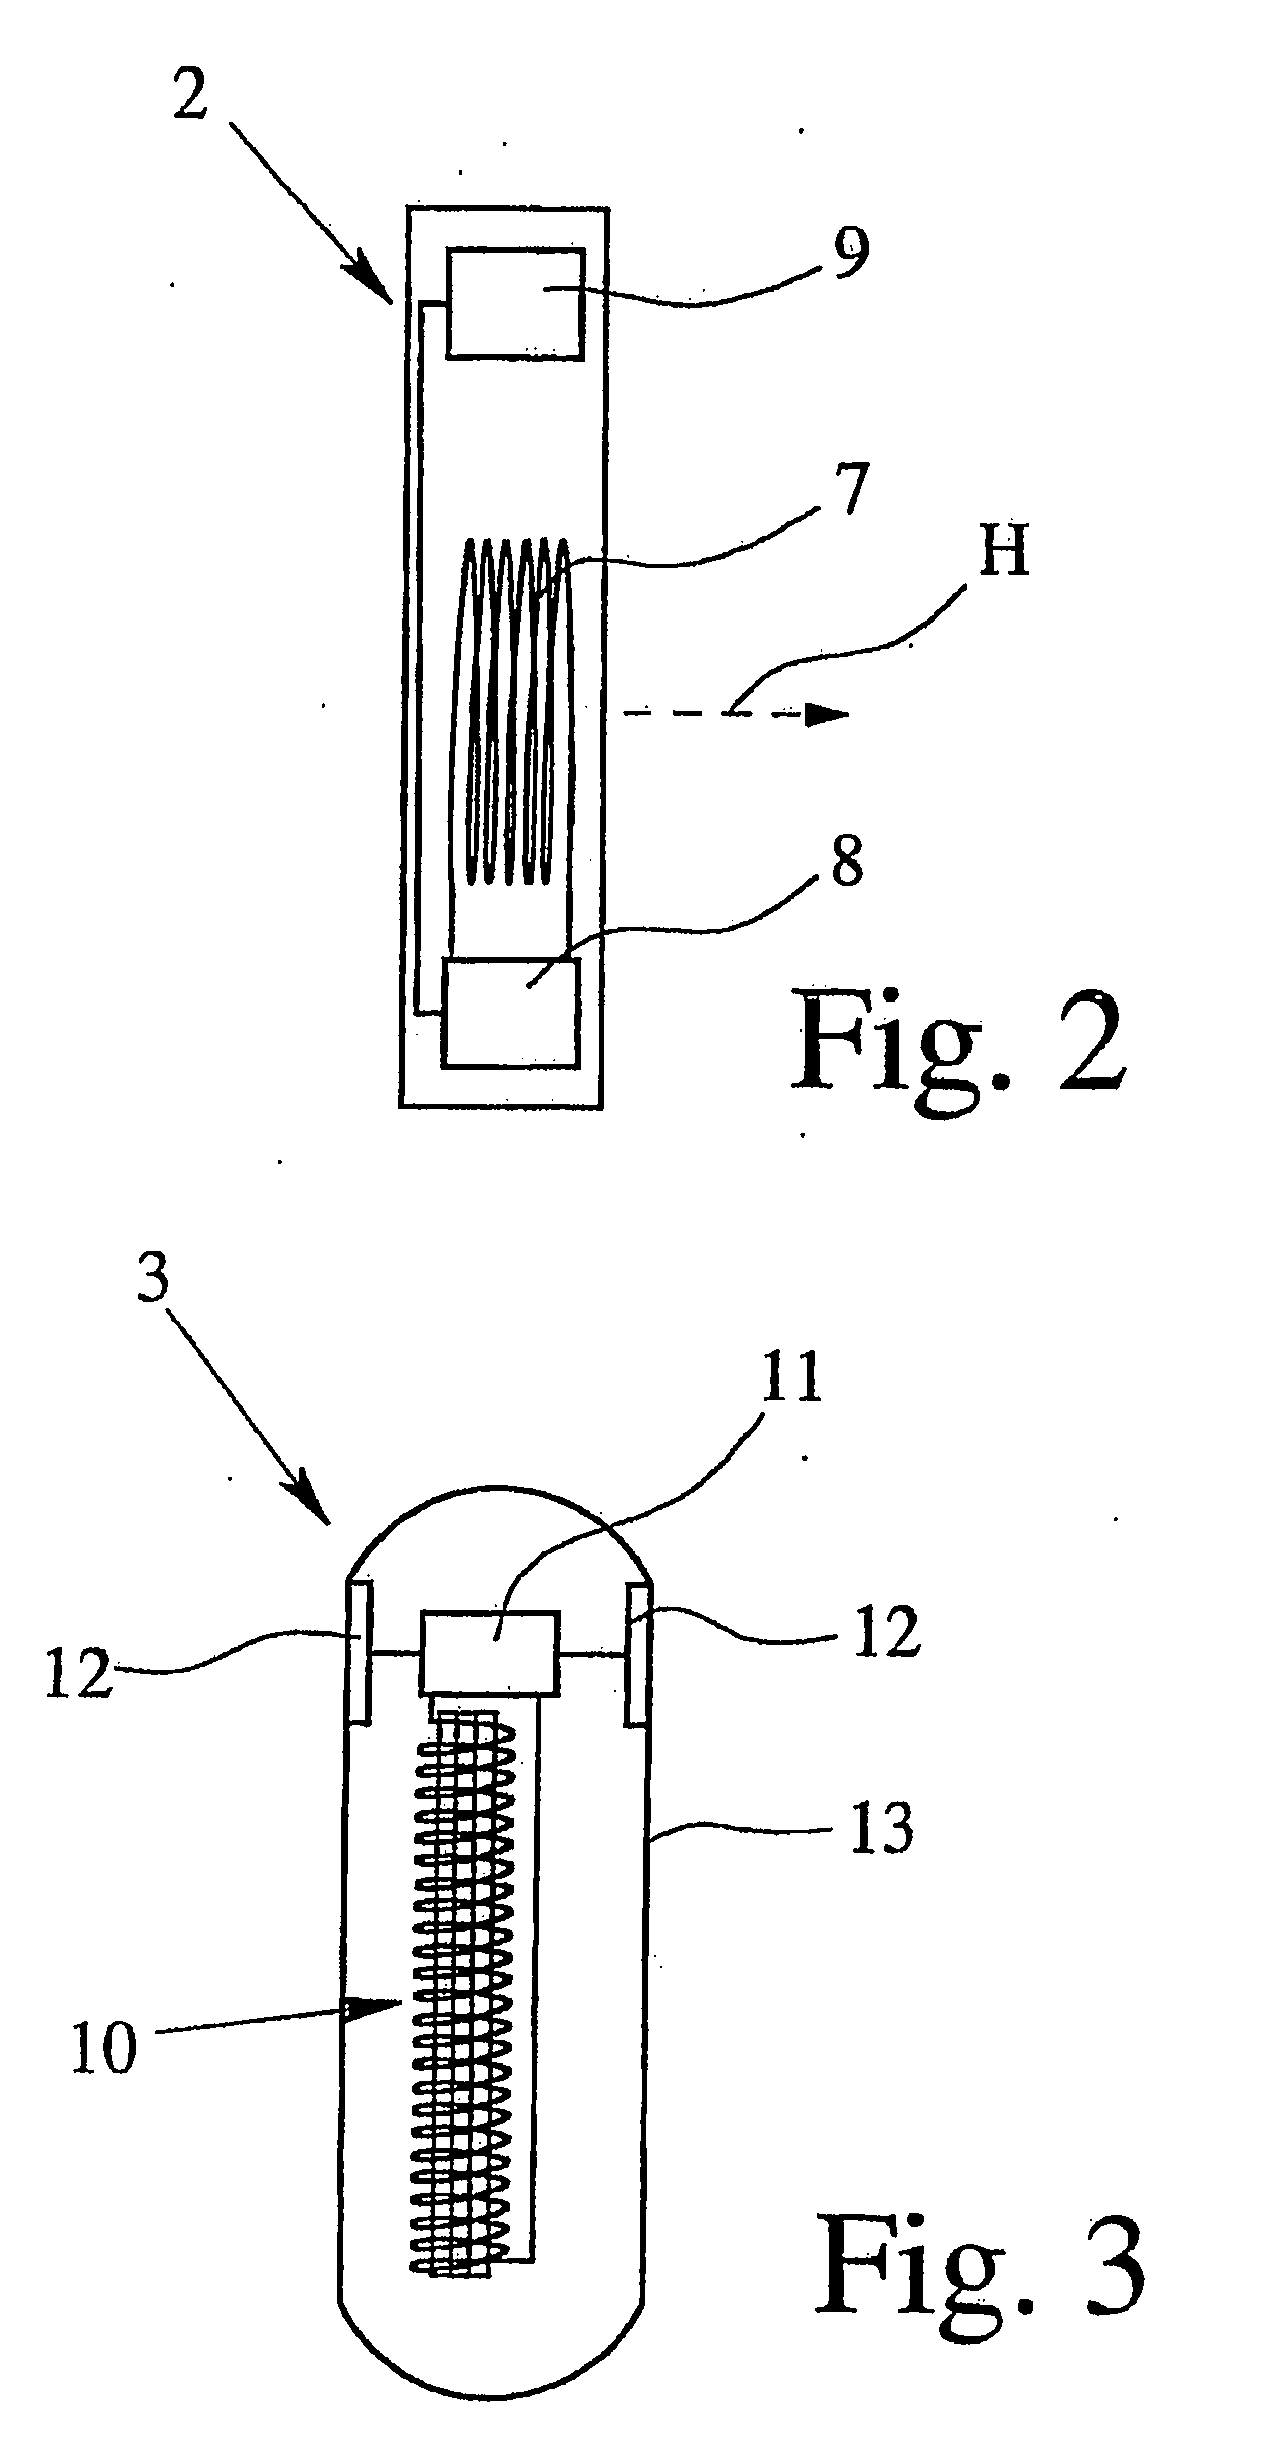 Stimulation system, in particular a cardiac pacemaker